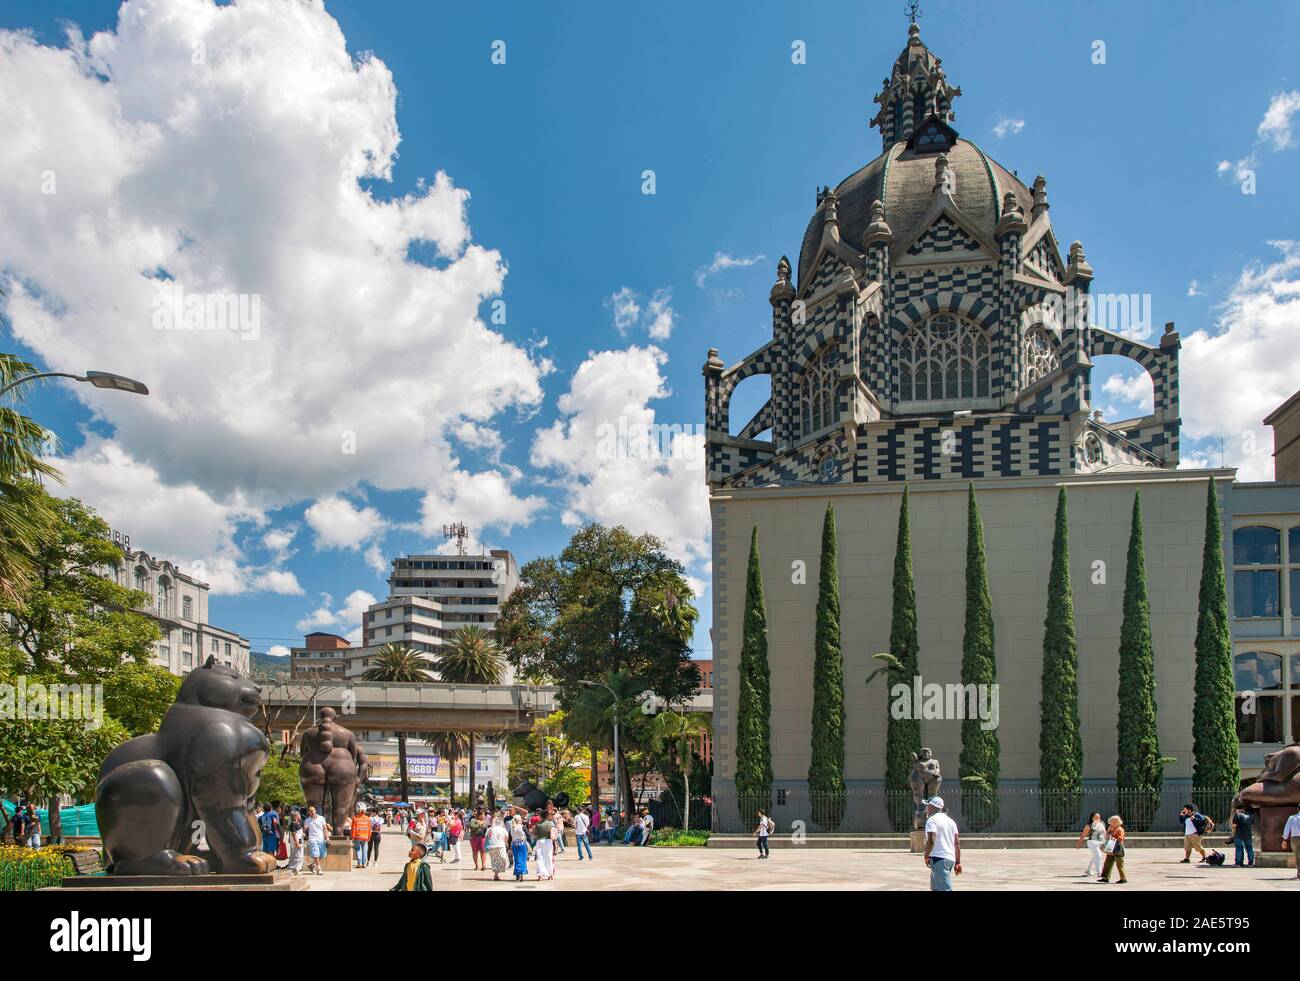 Botero plaza and the Rafael Uribe Uribe Palace of Culture in downtown Medellin, Colombia. Stock Photo